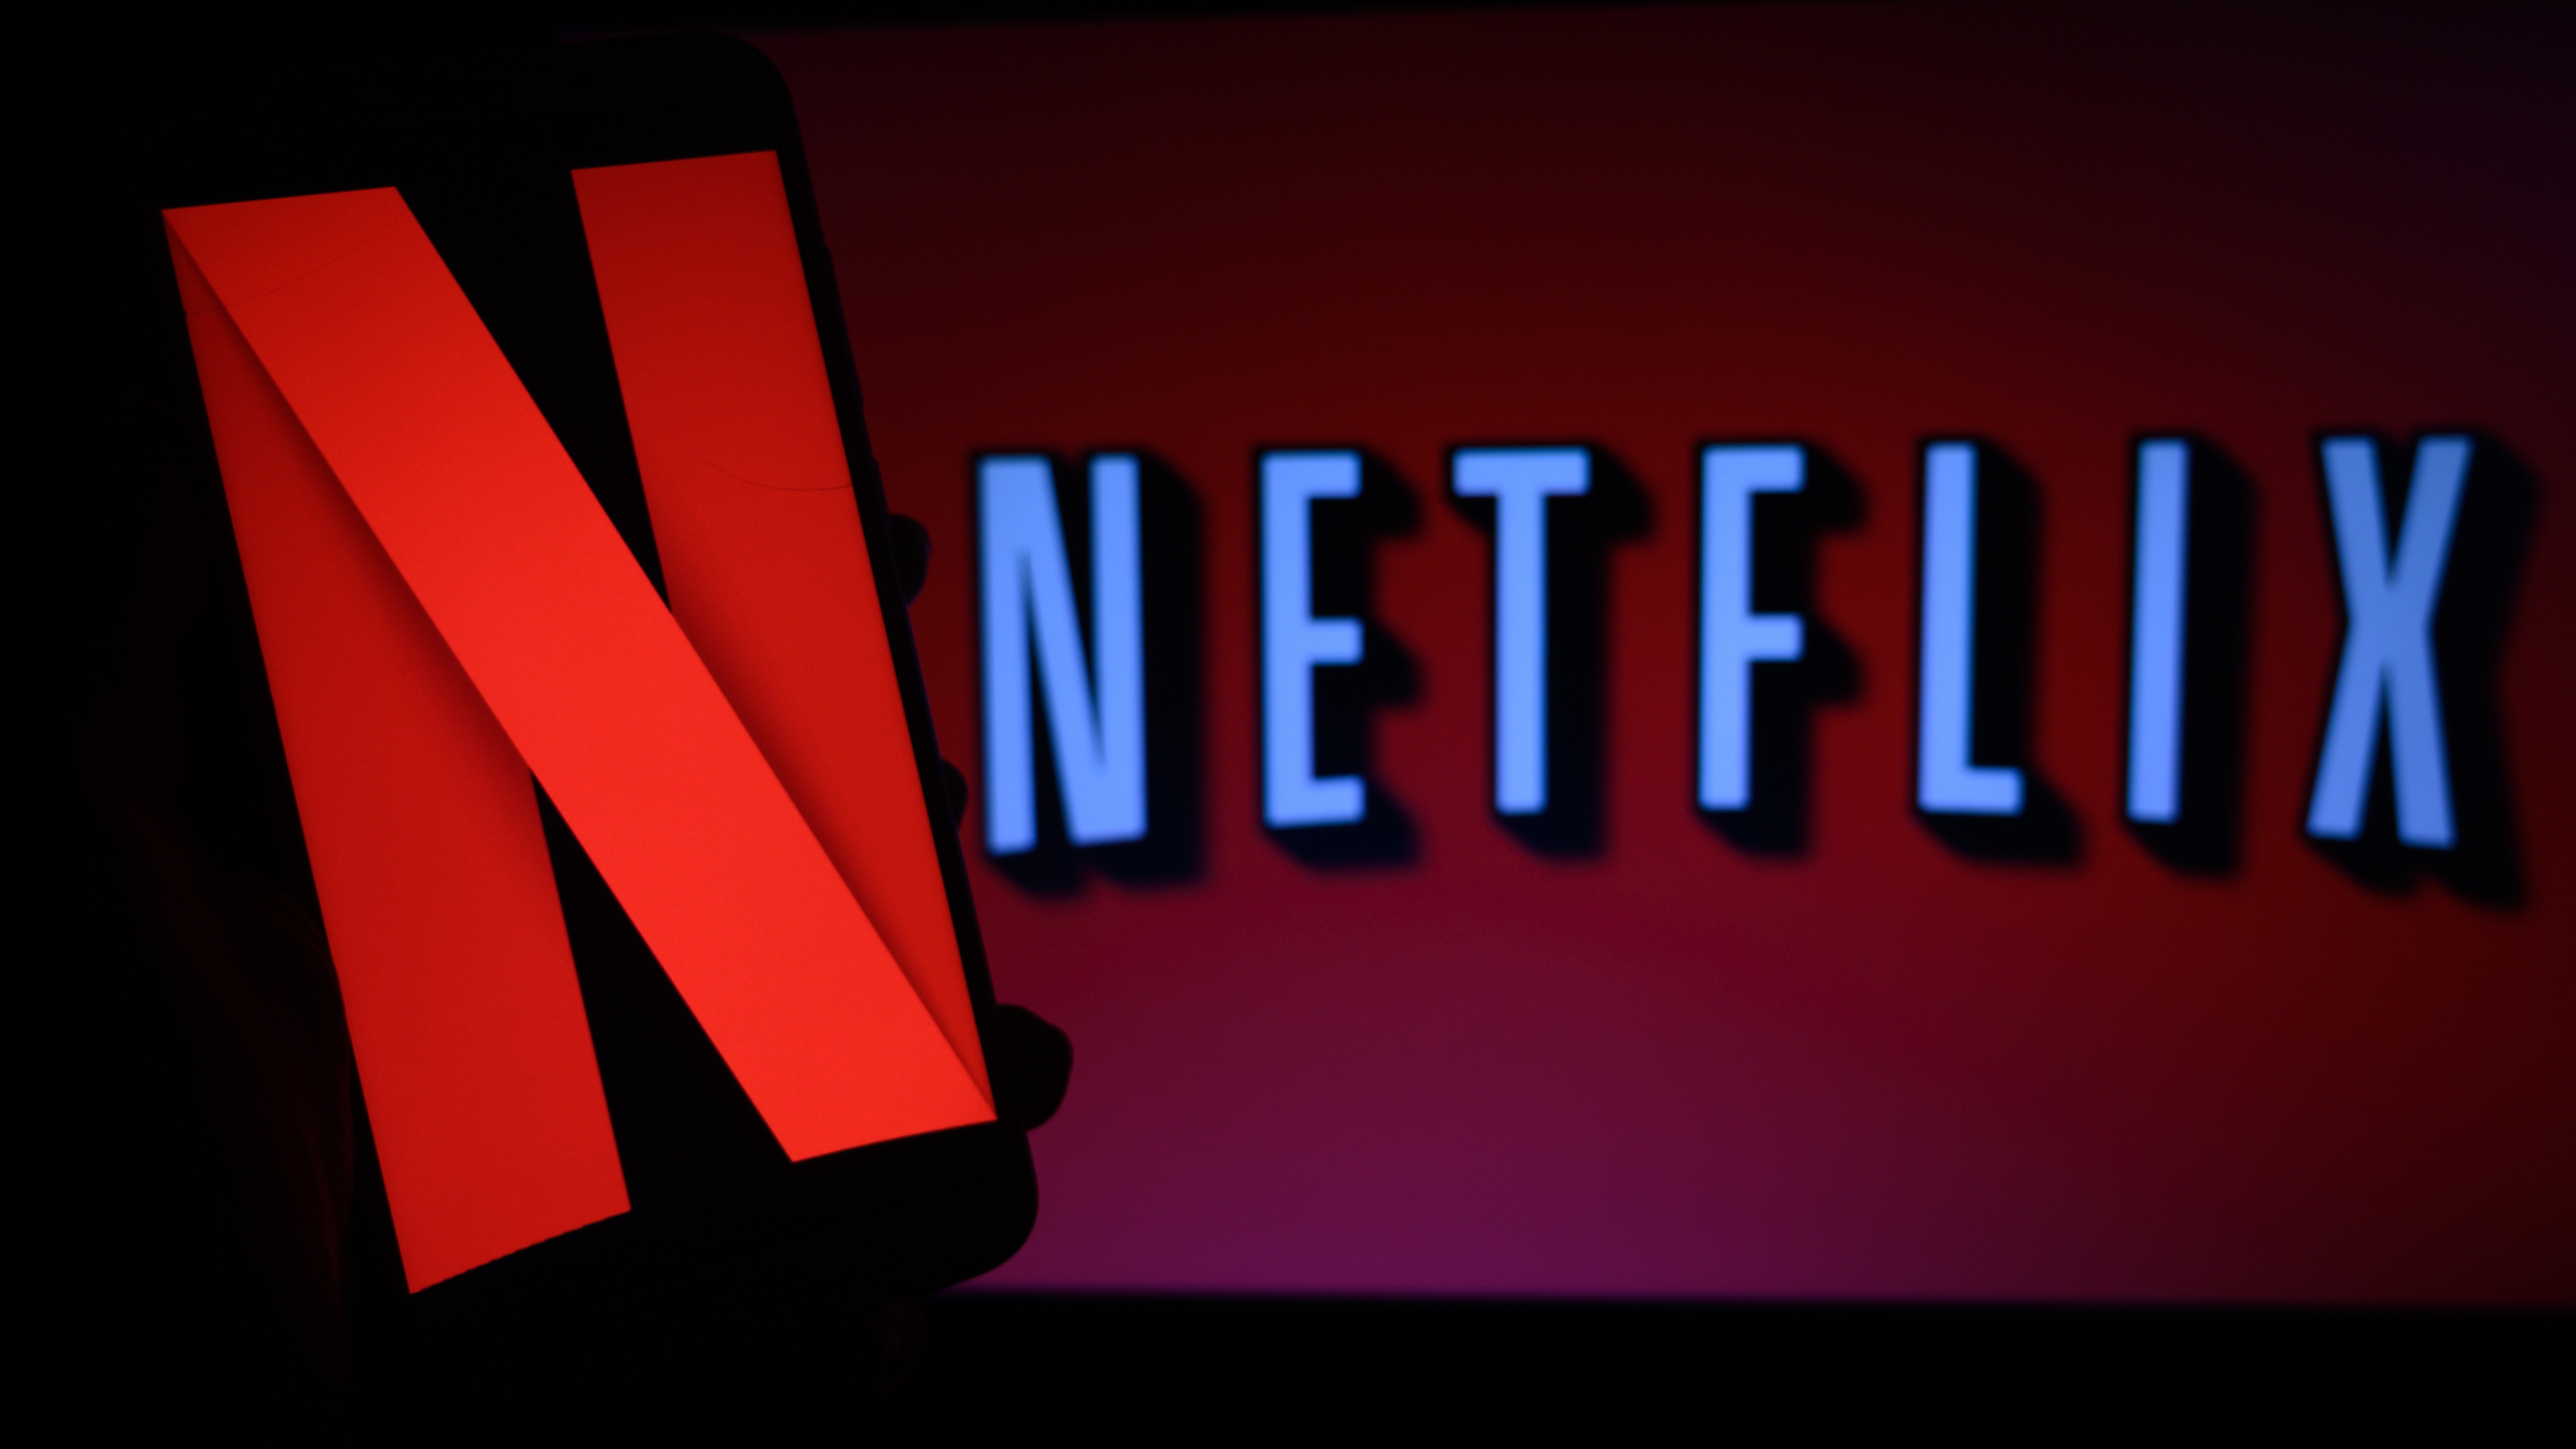 Netflix scaling back movie output, cuts jobs in restructuring